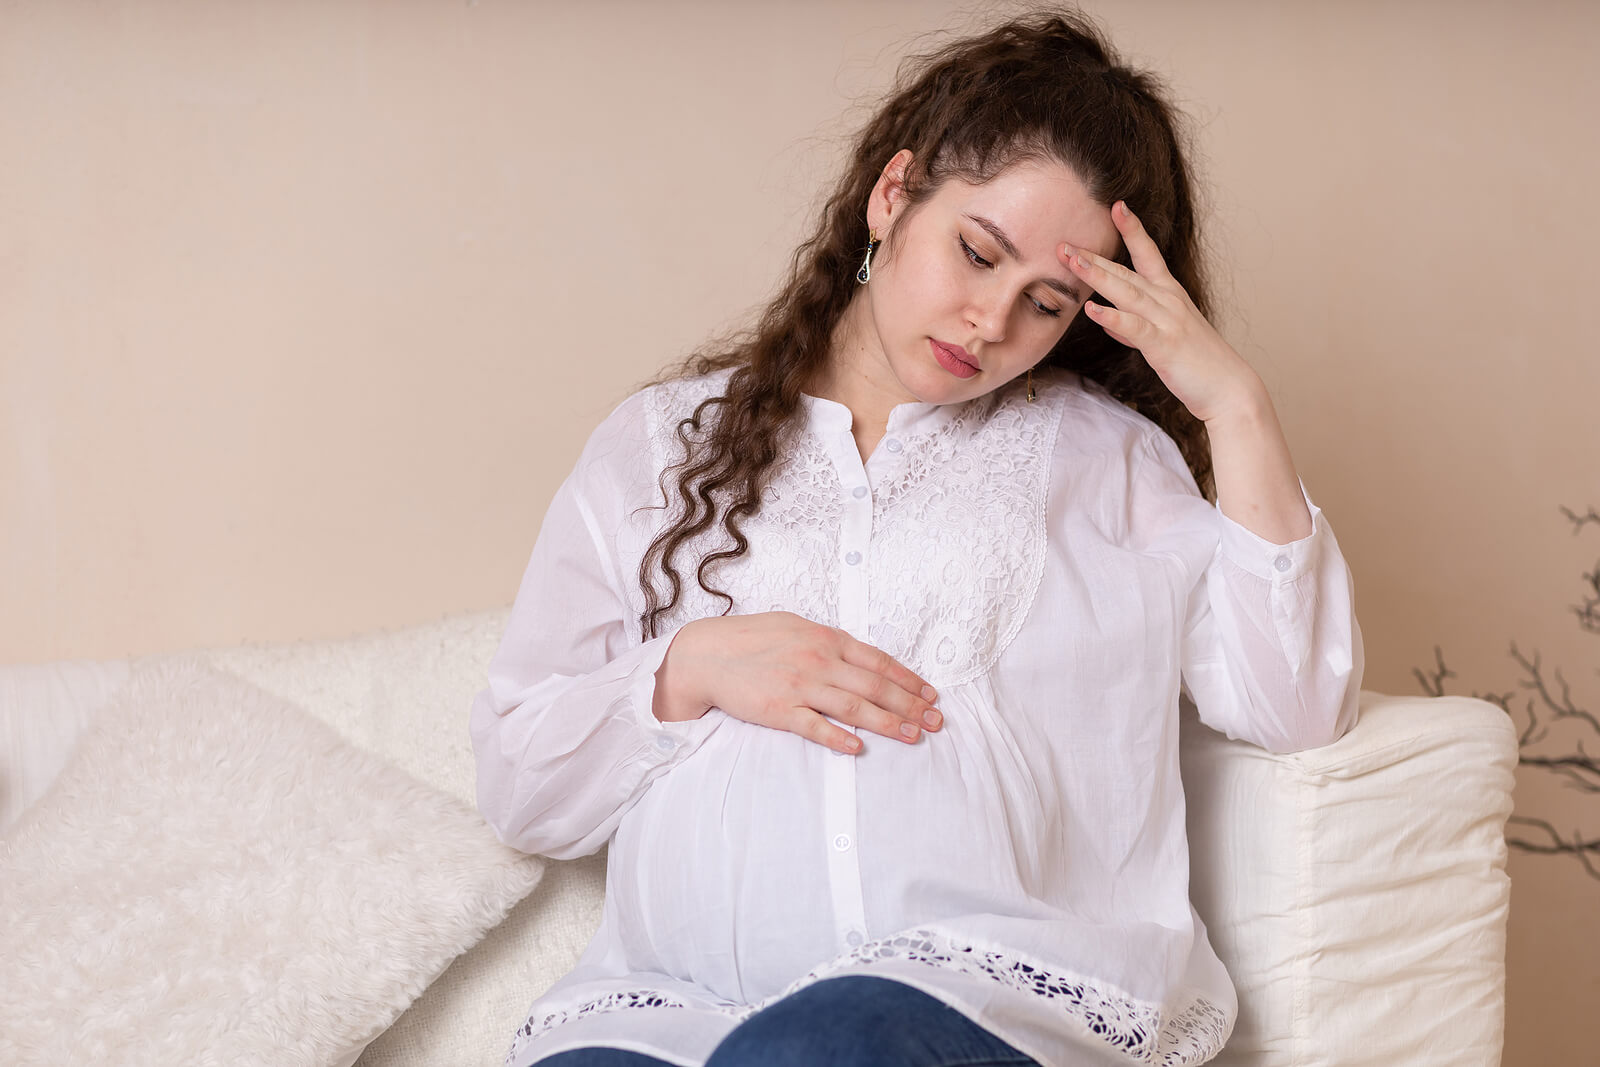 Bleeding during pregnancy may be due to a placenta previa.